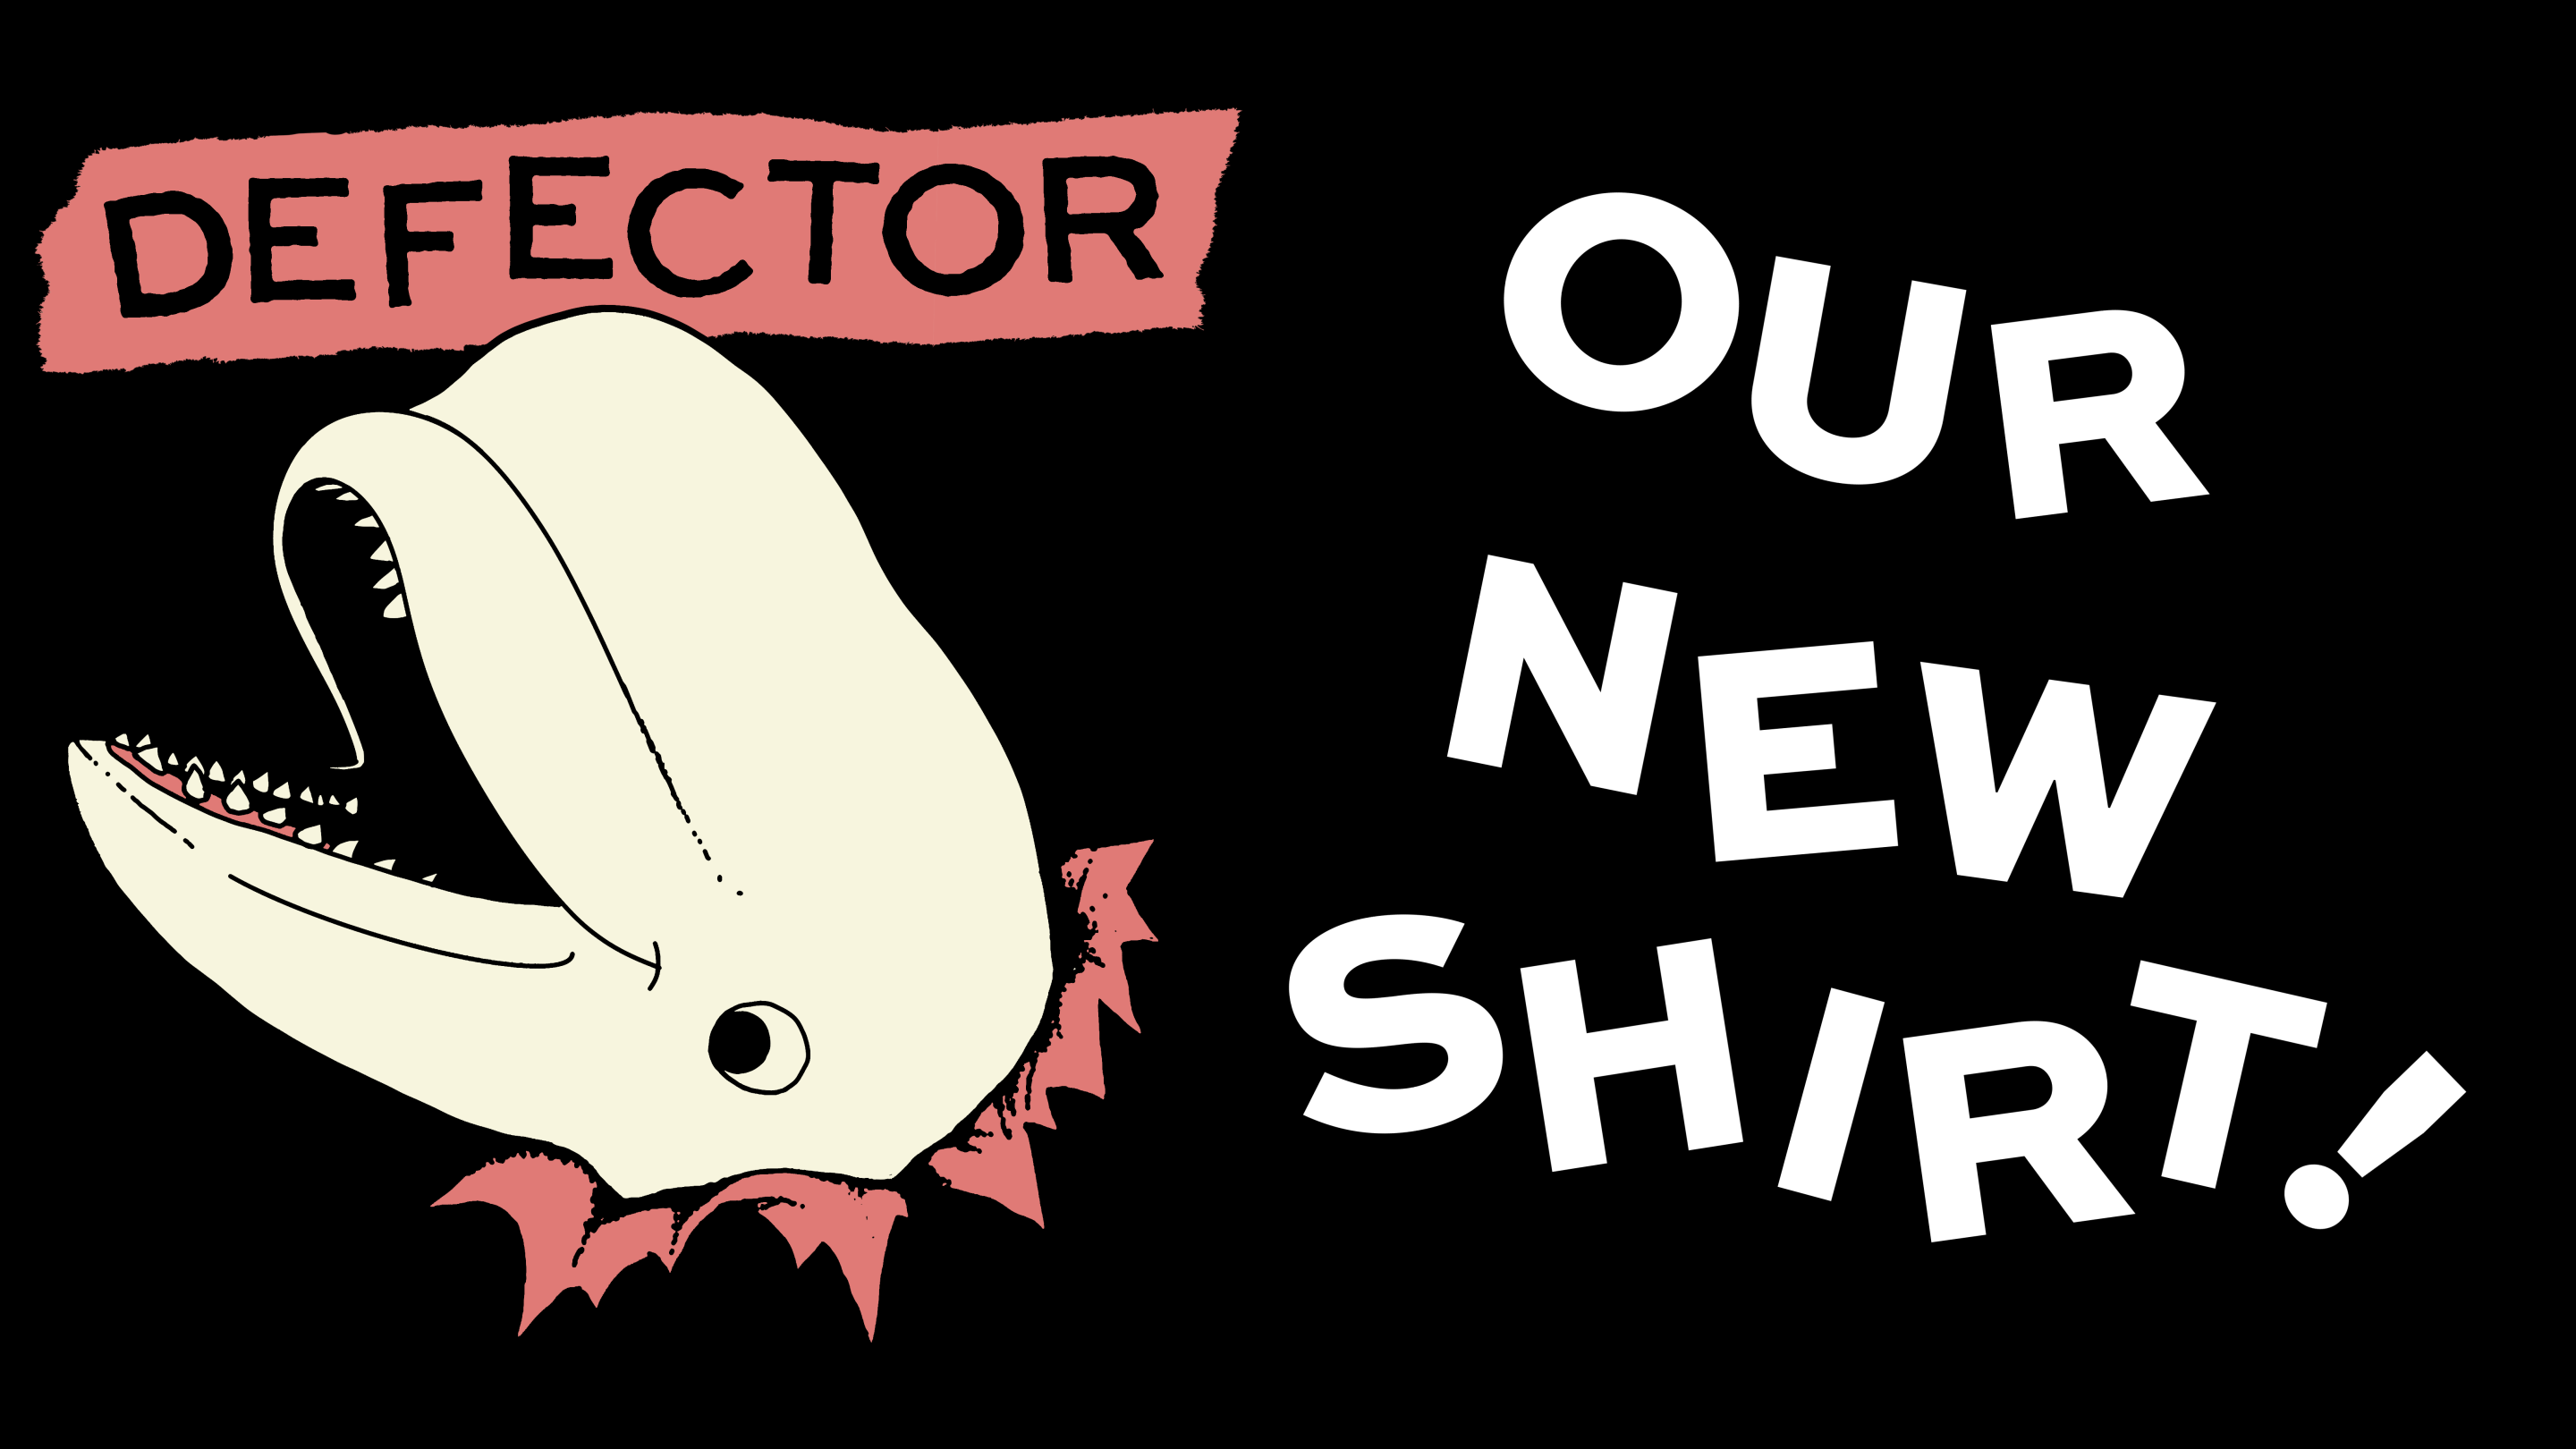 A white whale breaking through a black background, with a red Defector logo that the whale has knocked out of place above it. Next to it the words "OUR NEW SHIRT!" also being knocked out of place are next to it.